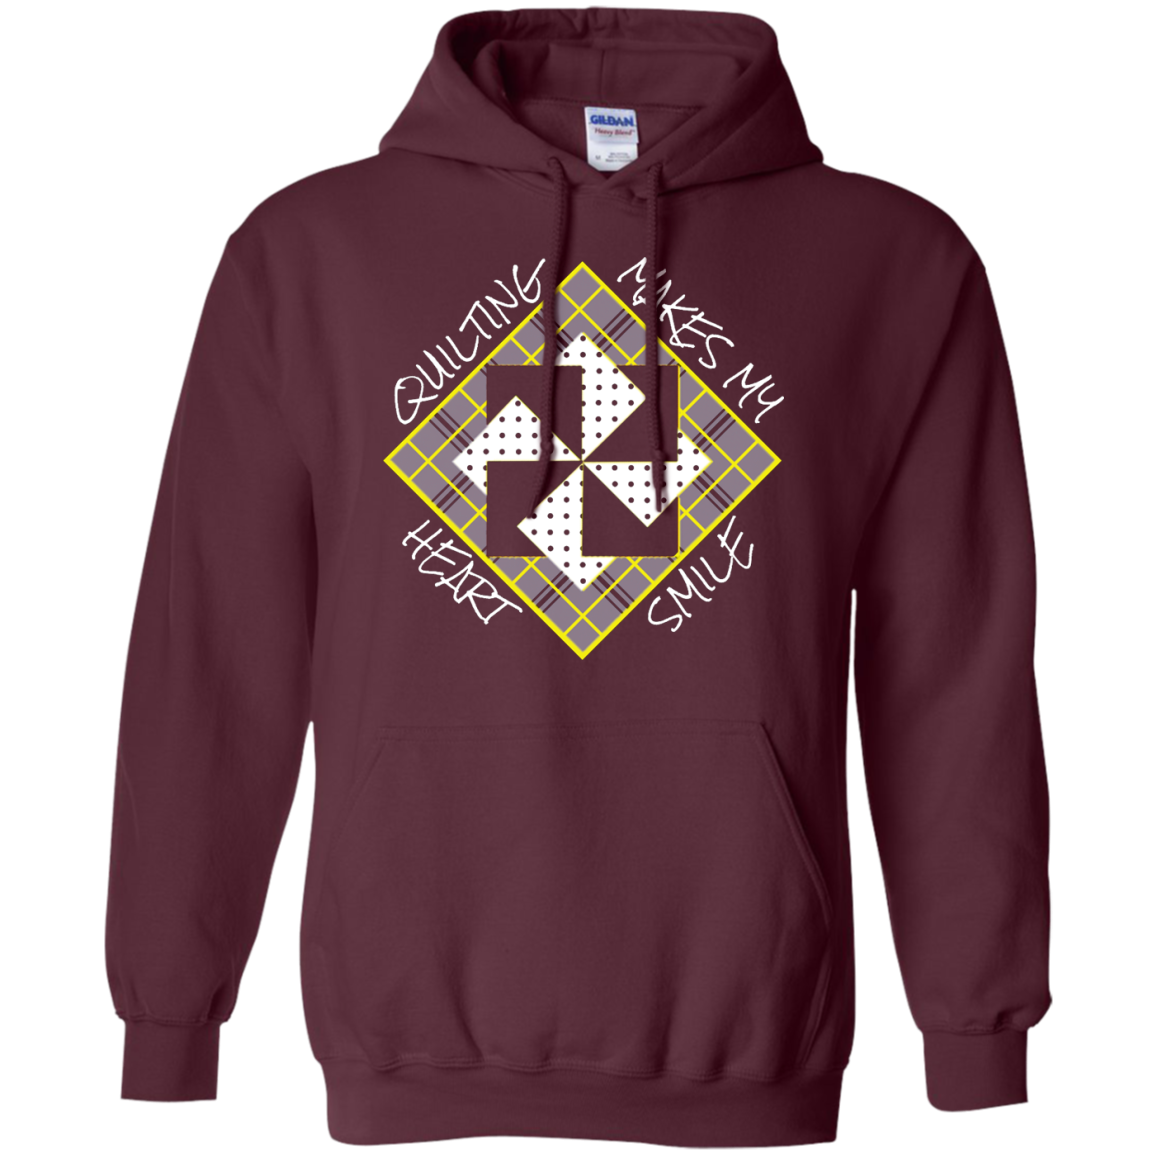 Quilting Makes My Heart Smile Pullover Hoodie